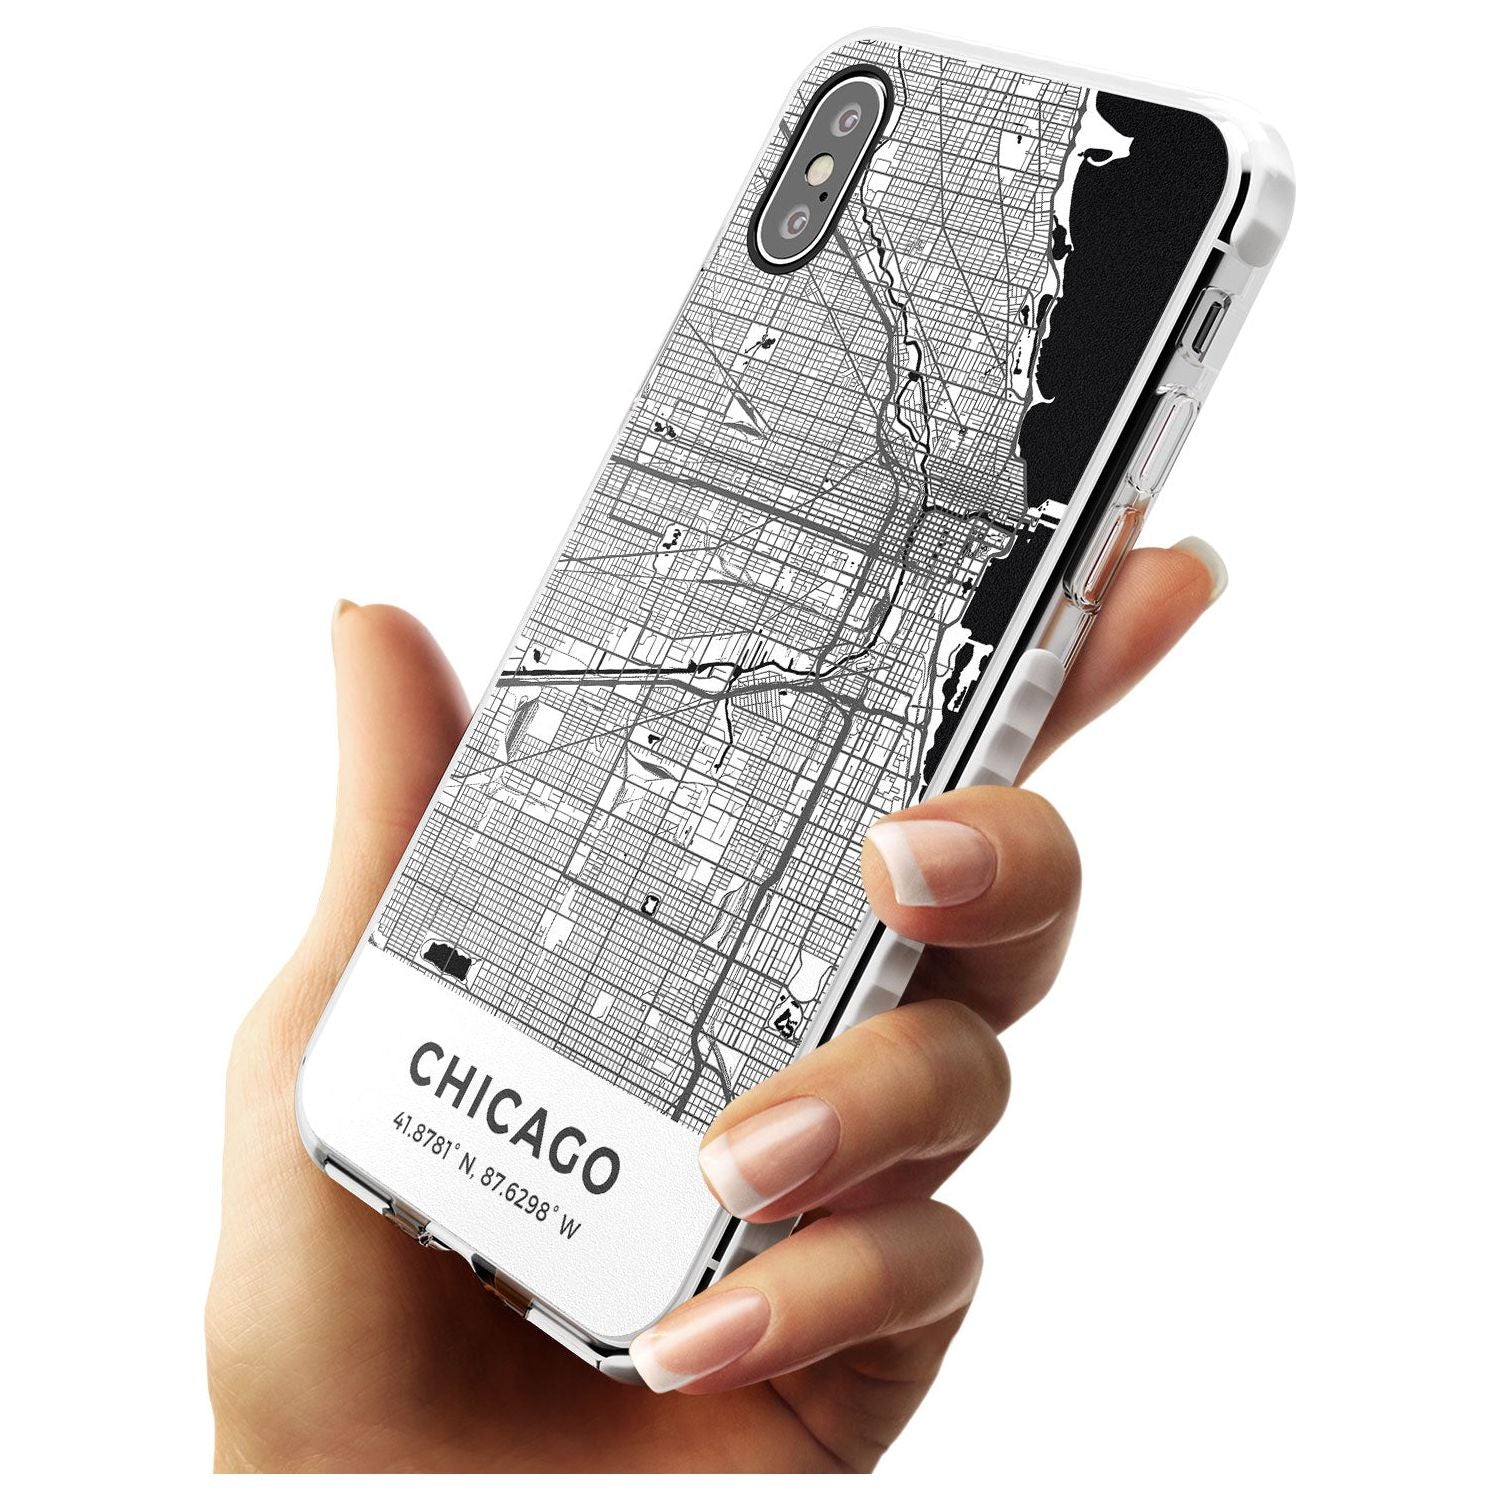 Map of Chicago, Illinois Impact Phone Case for iPhone X XS Max XR